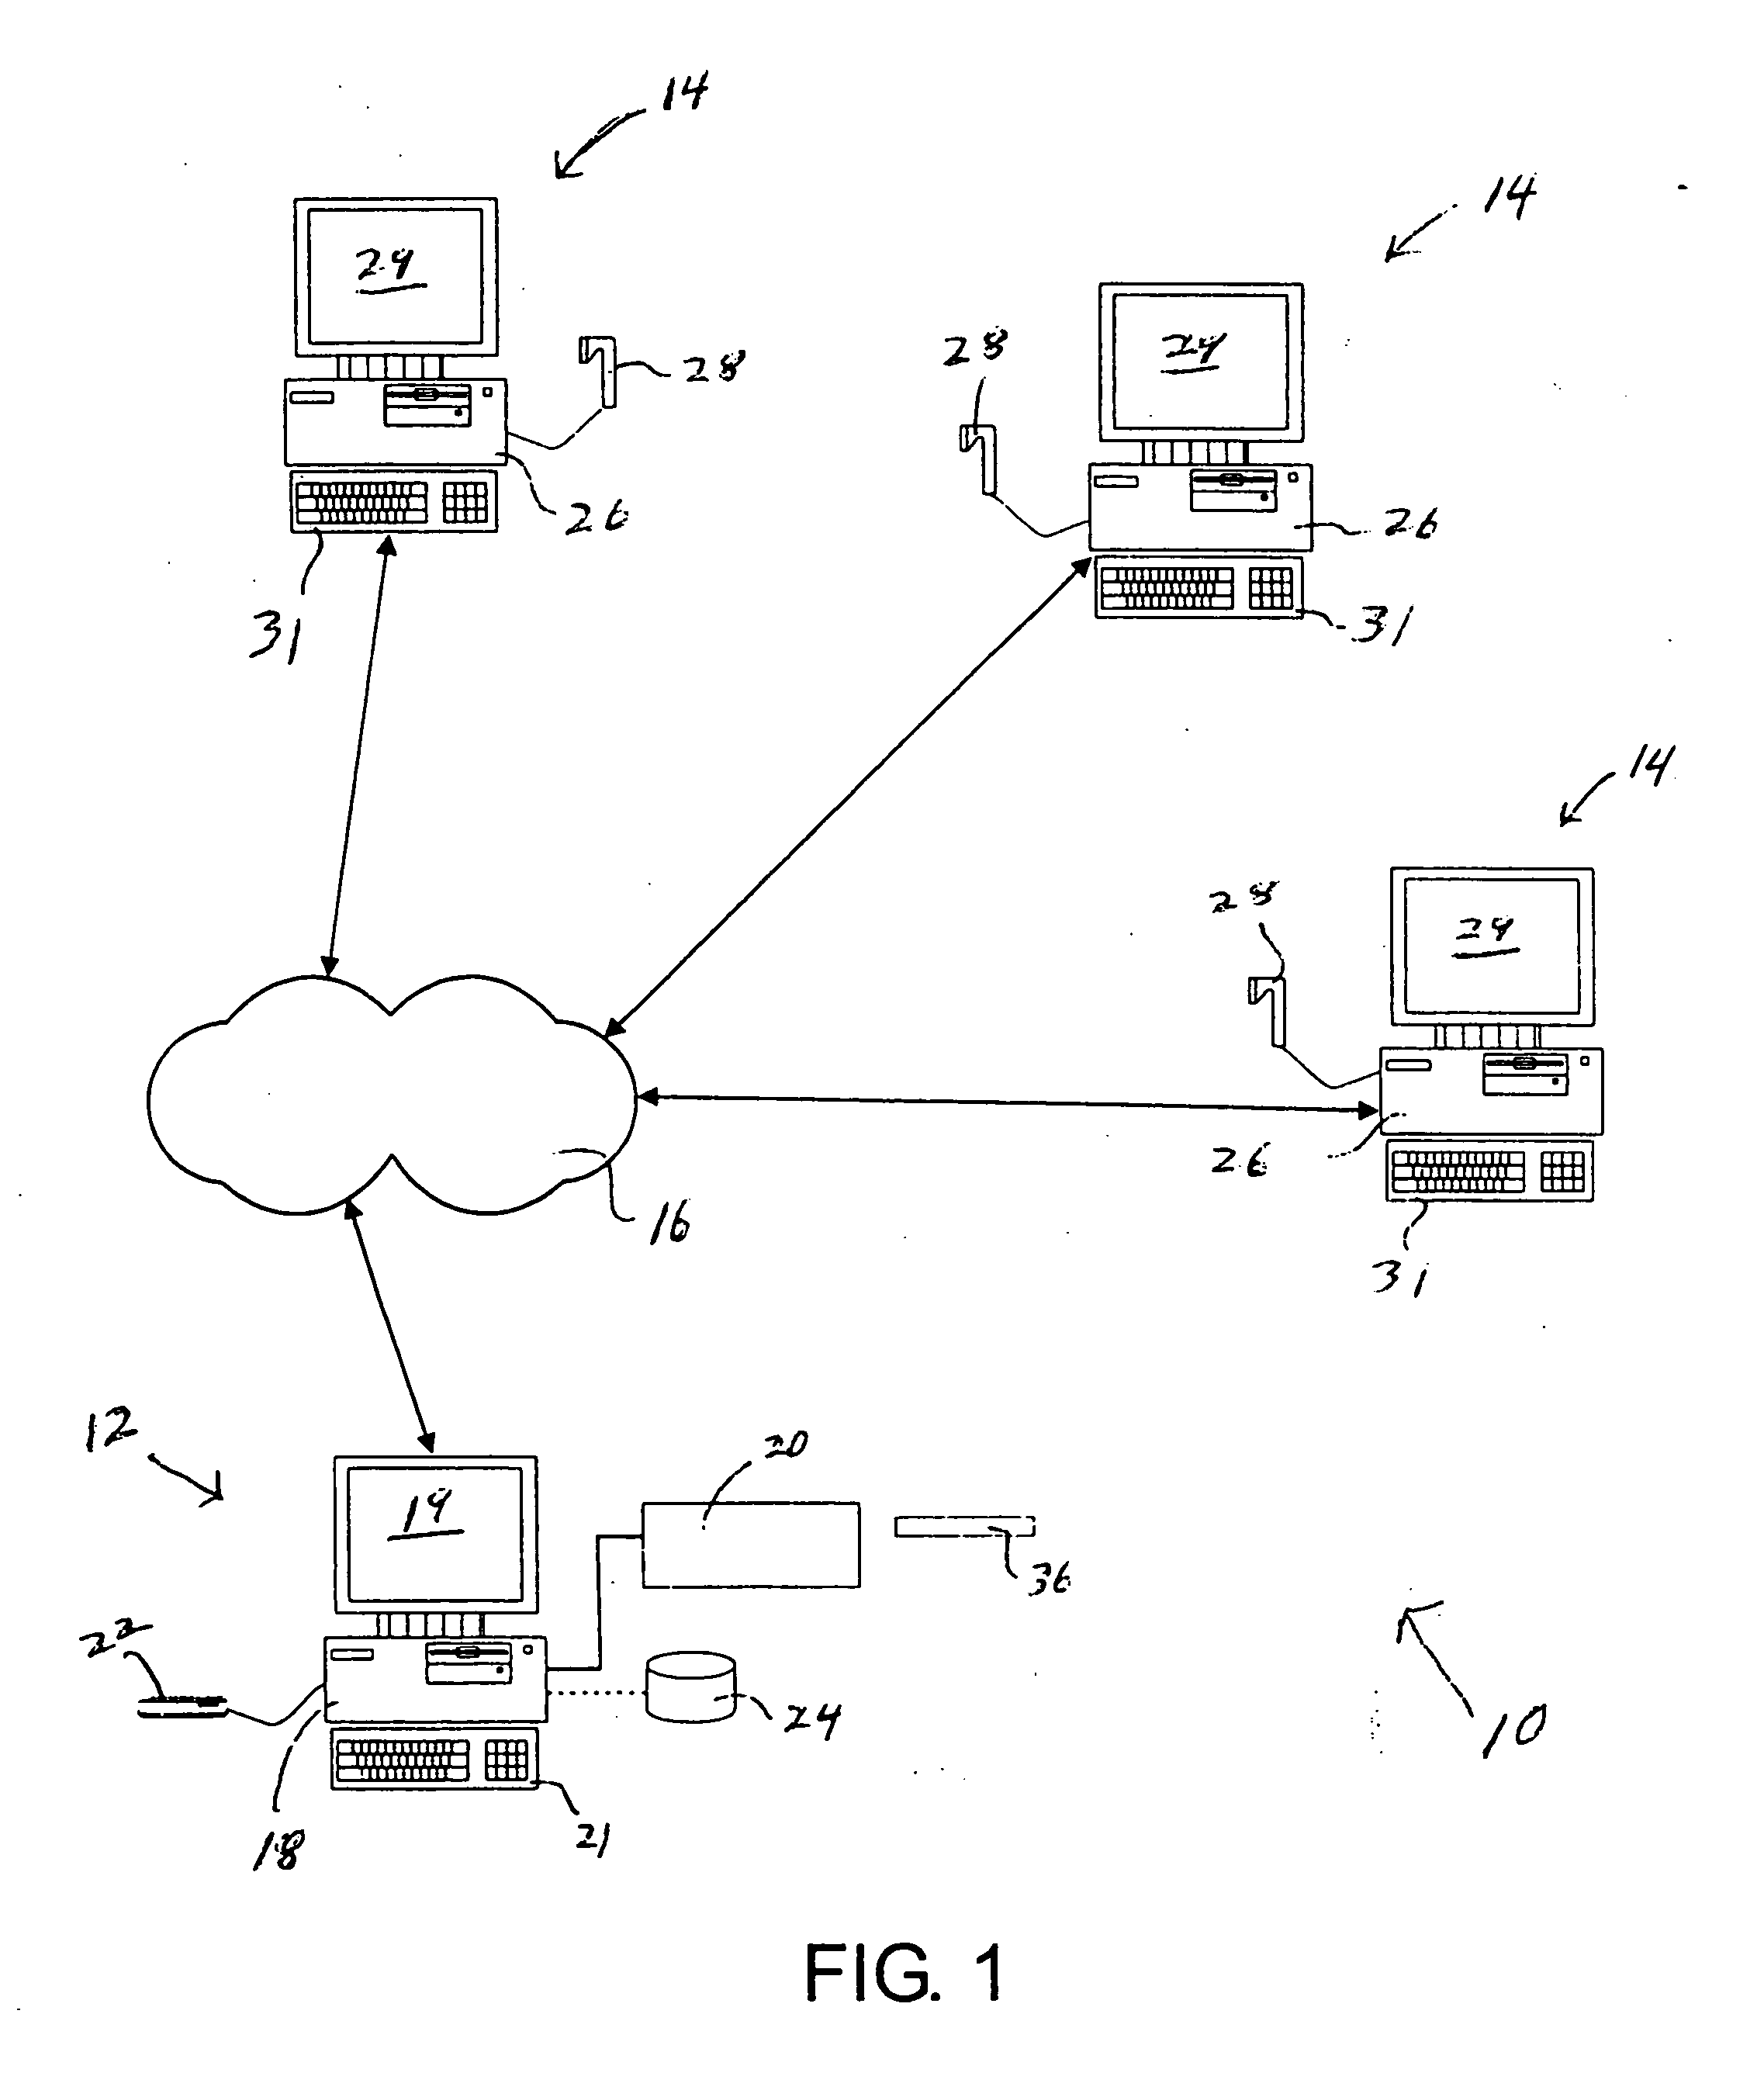 System and method for authorizing transactions